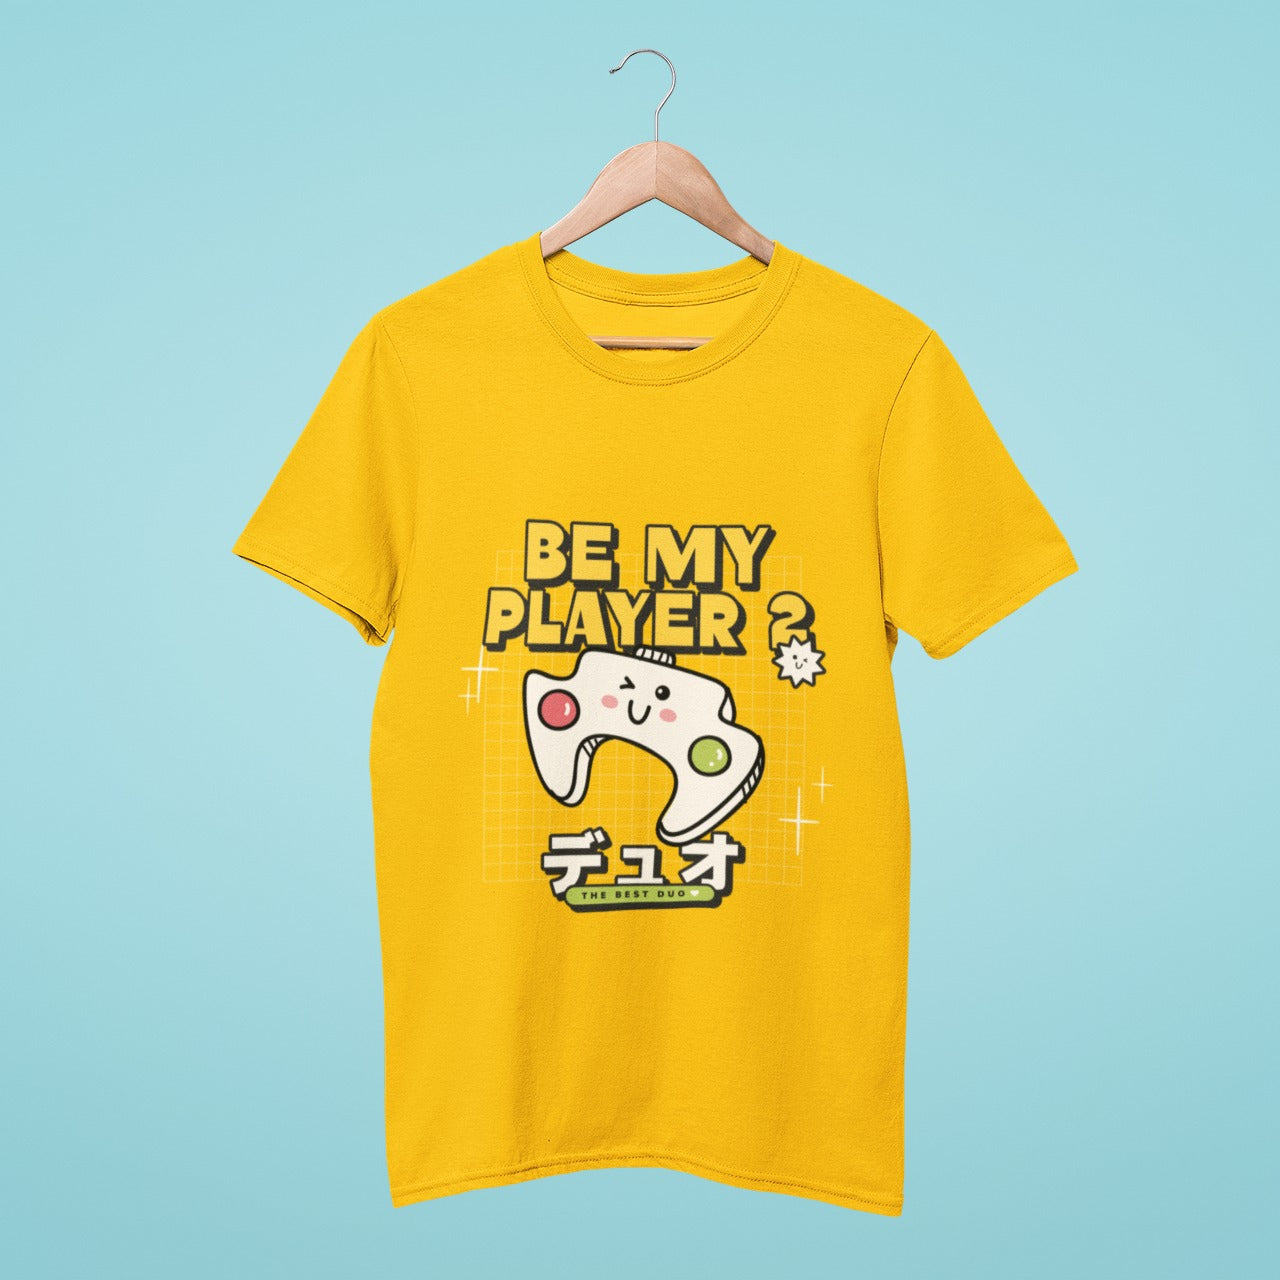 This yellow t-shirt is the perfect way to find your Player 2! With a cute winking joystick and the Japanese word for duo, it's clear that you're looking for a gaming partner. The slogan "Be my Player 2" adds a playful touch, and the small text "The Best Duo" reinforces the message.